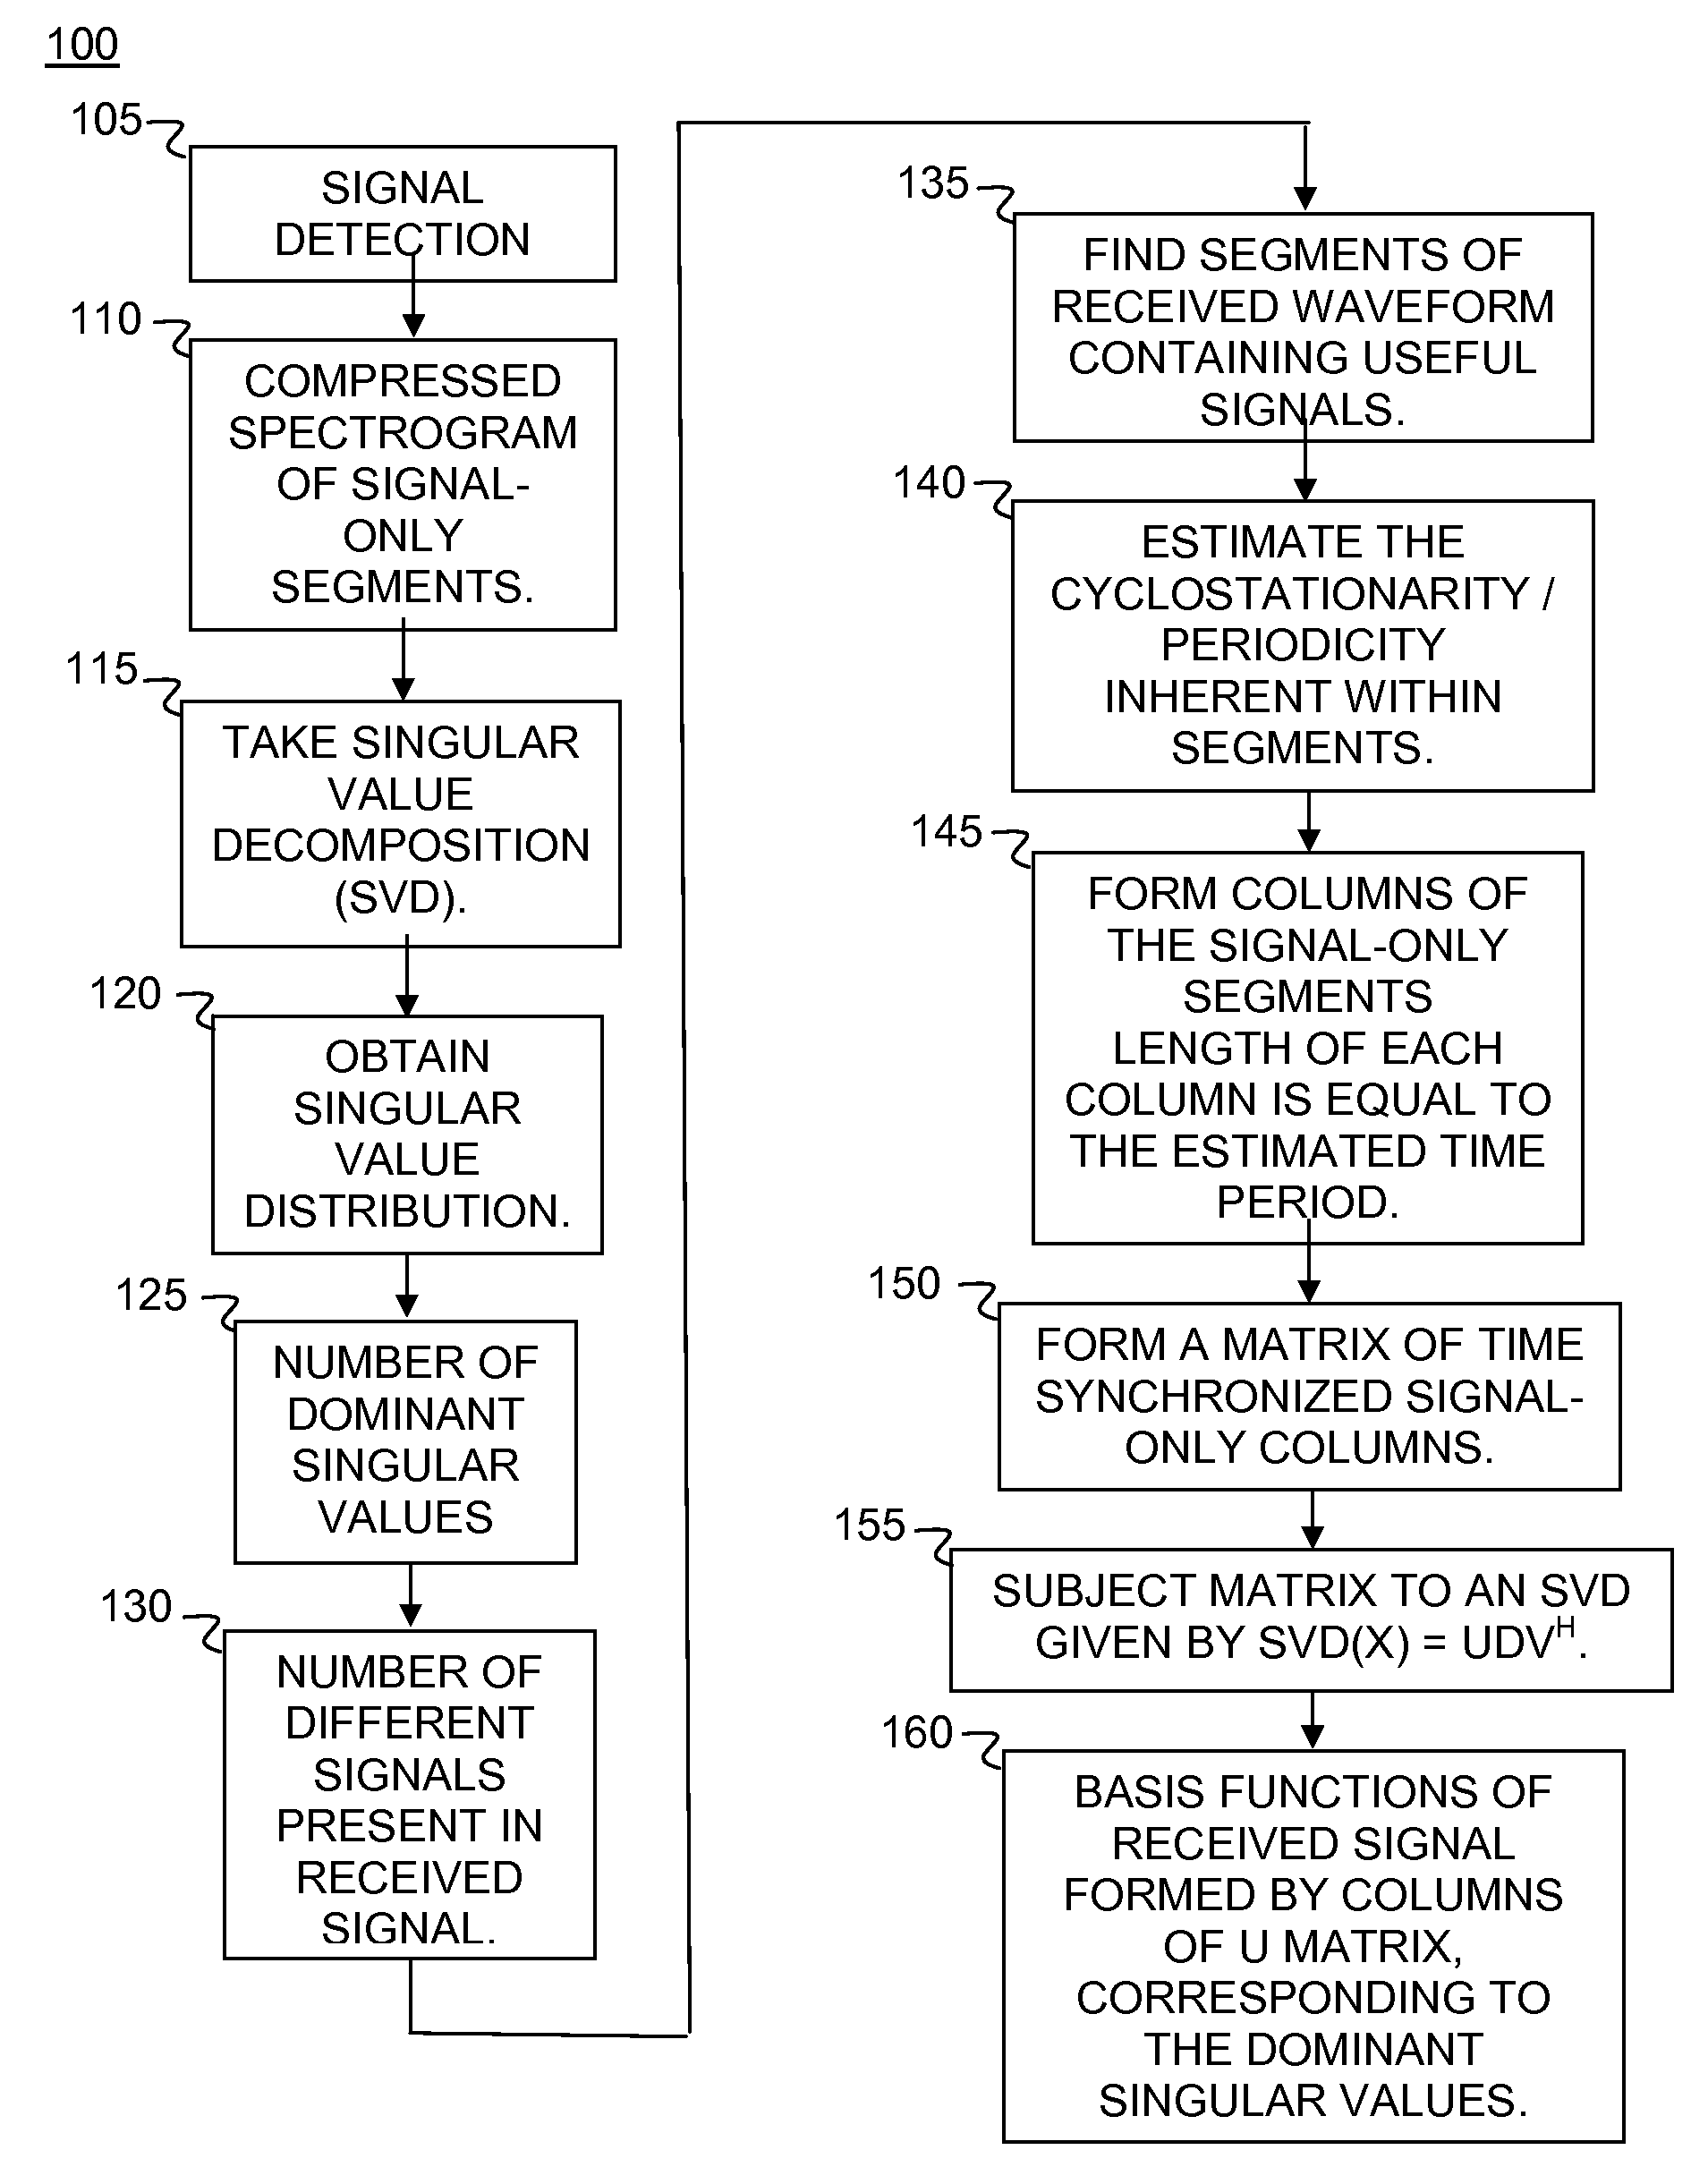 Method and apparatus for multiple signal identification and finding the basis functions of the received signal